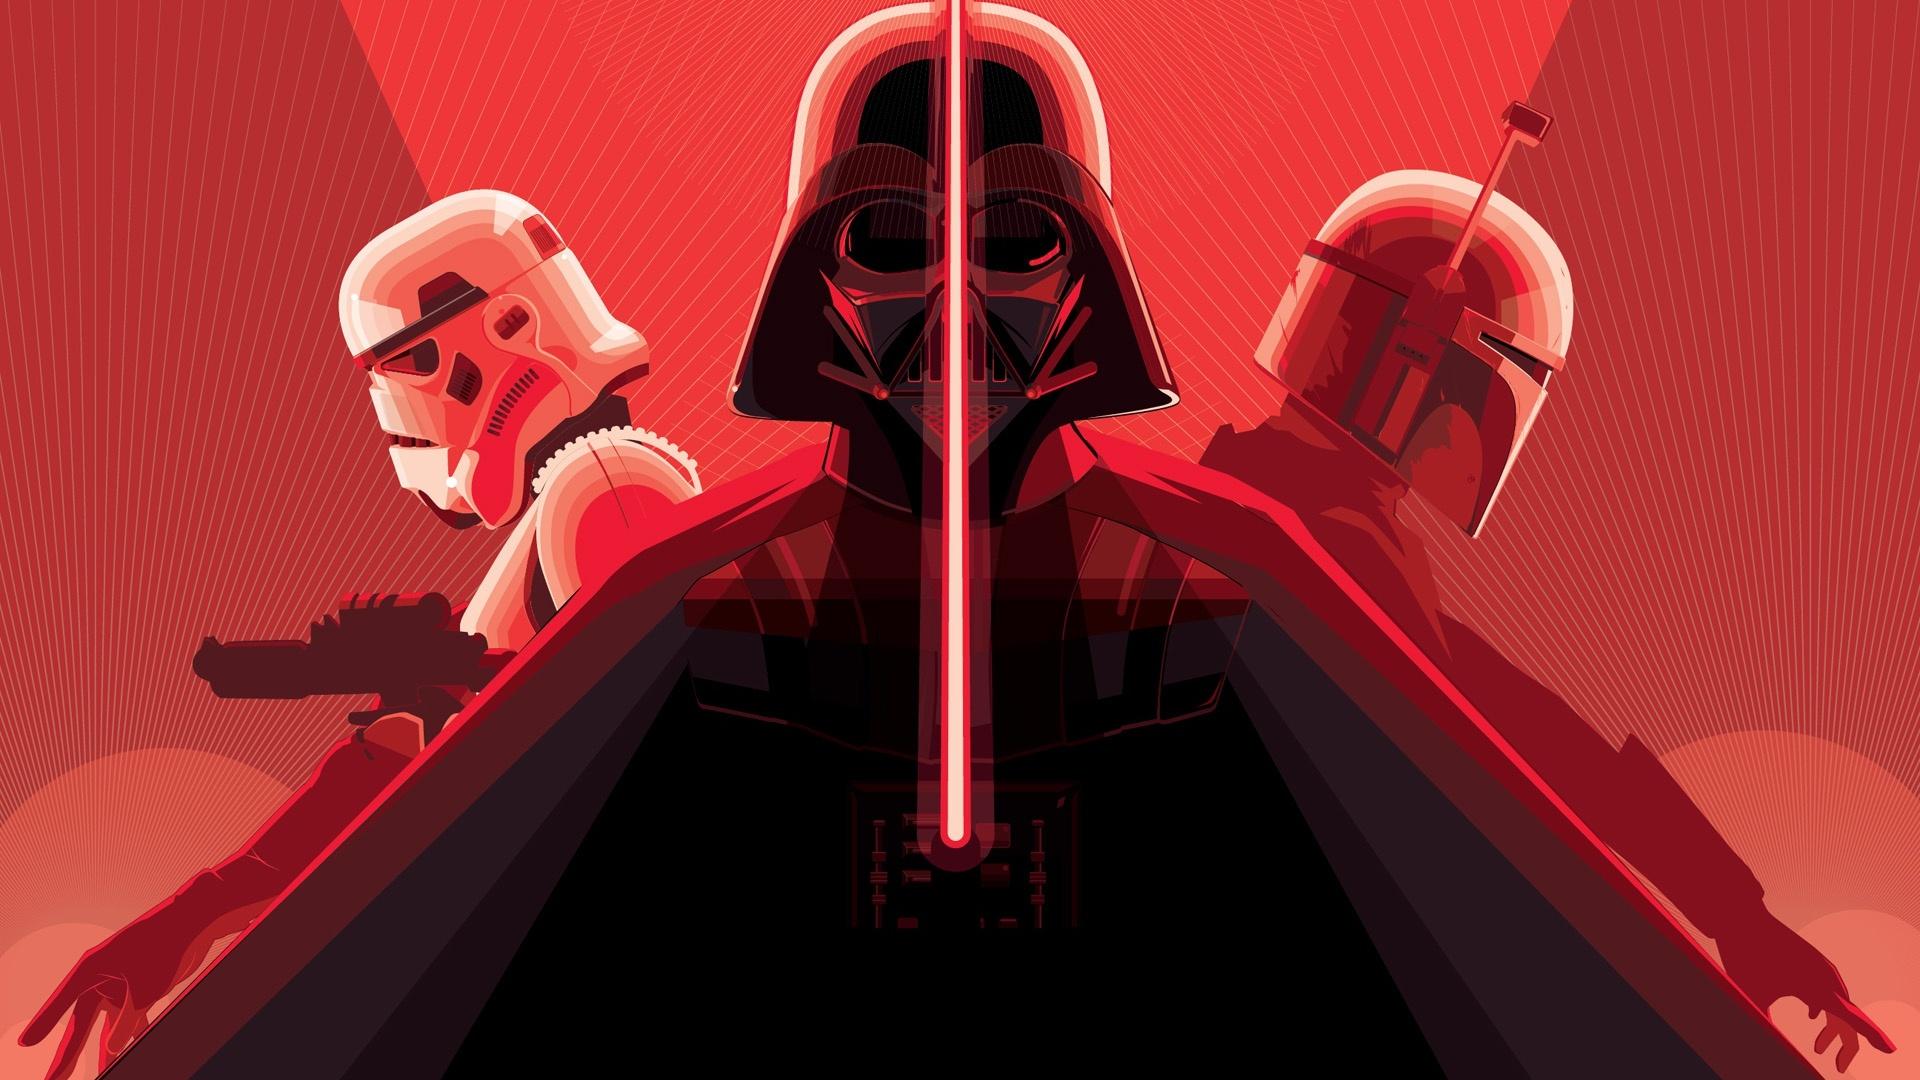 Darth Vader Star Wars Wallpaper and Themes for New Tab Page!